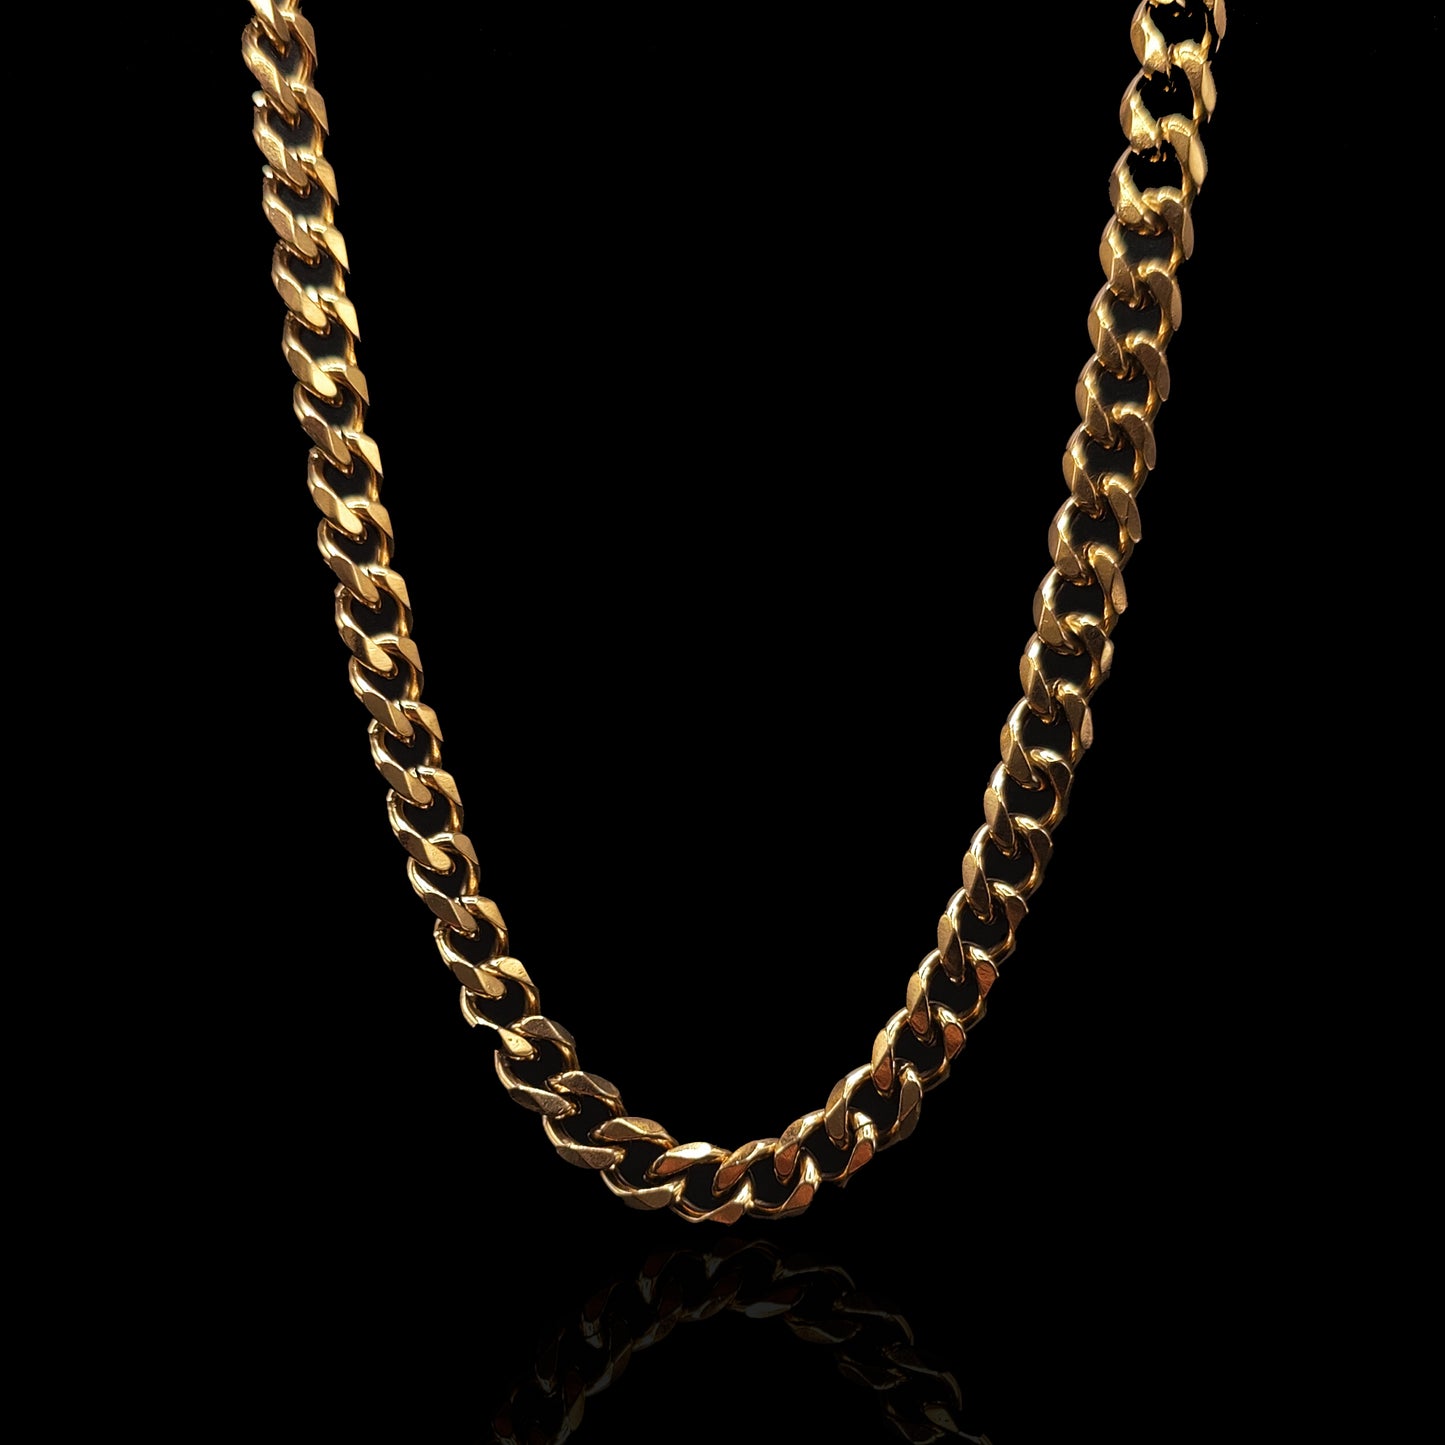 Gold Curb Link Chain 7mm